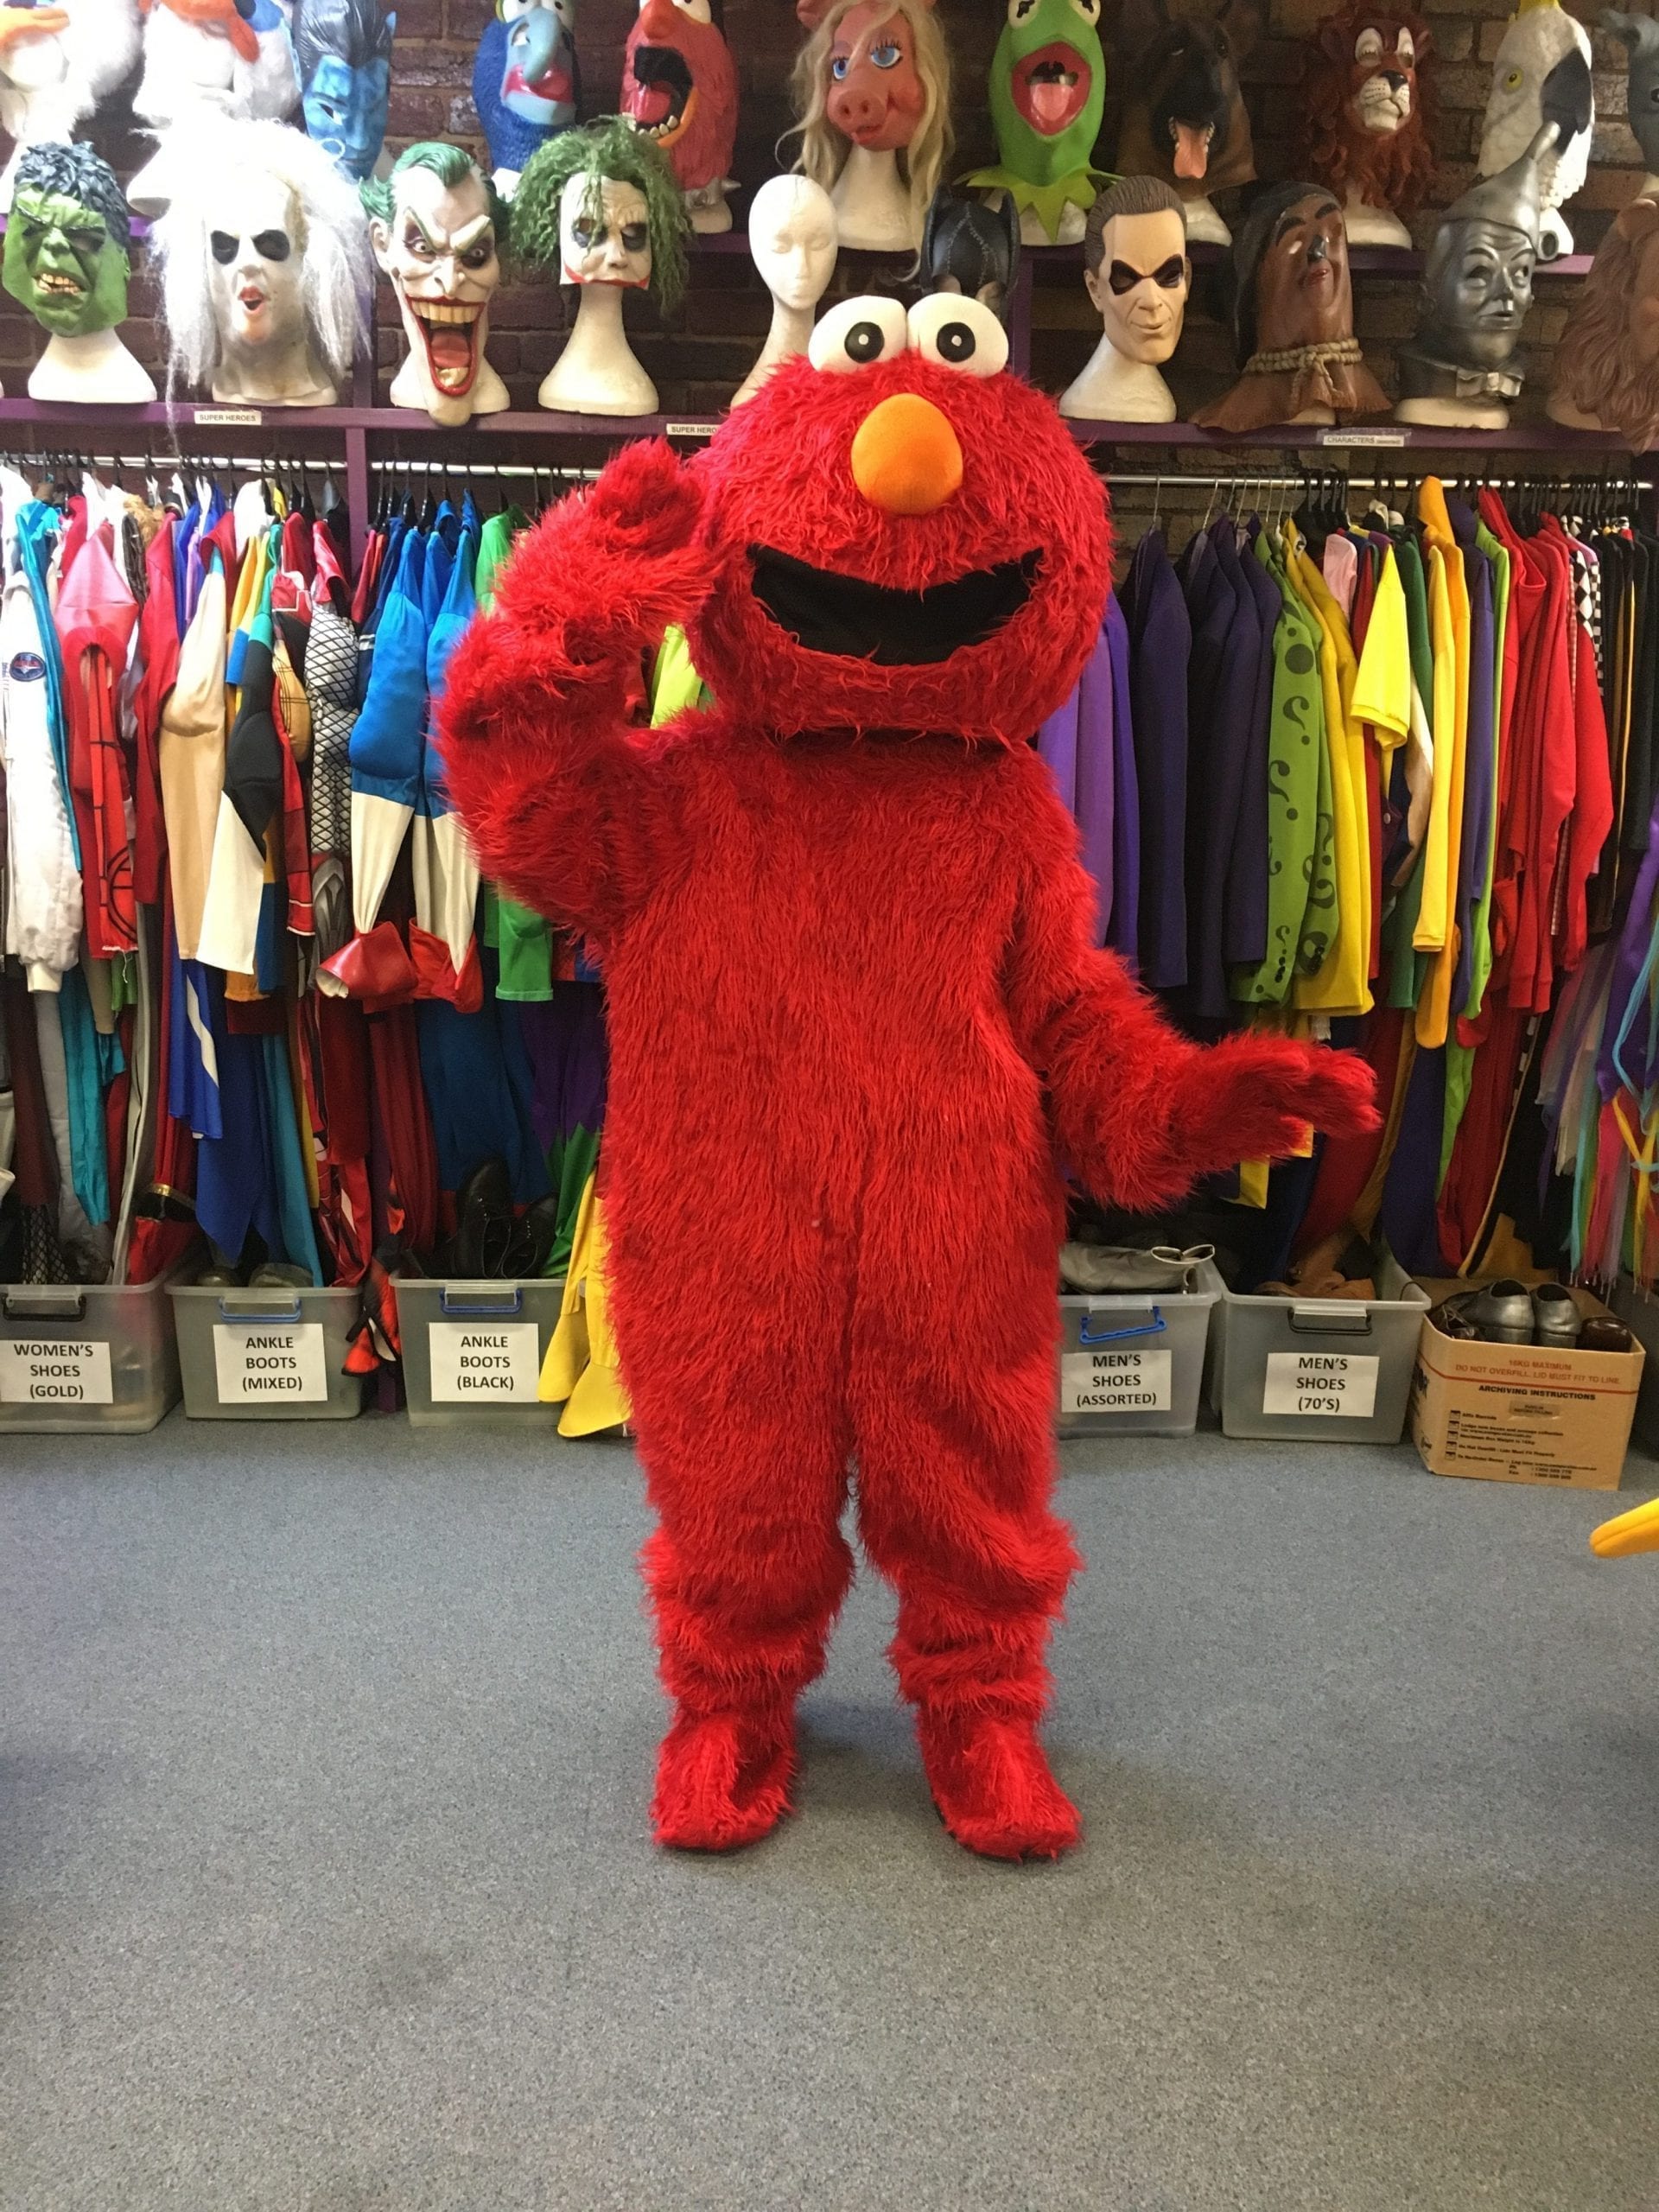 Featured image for “Elmo (Mascot)”